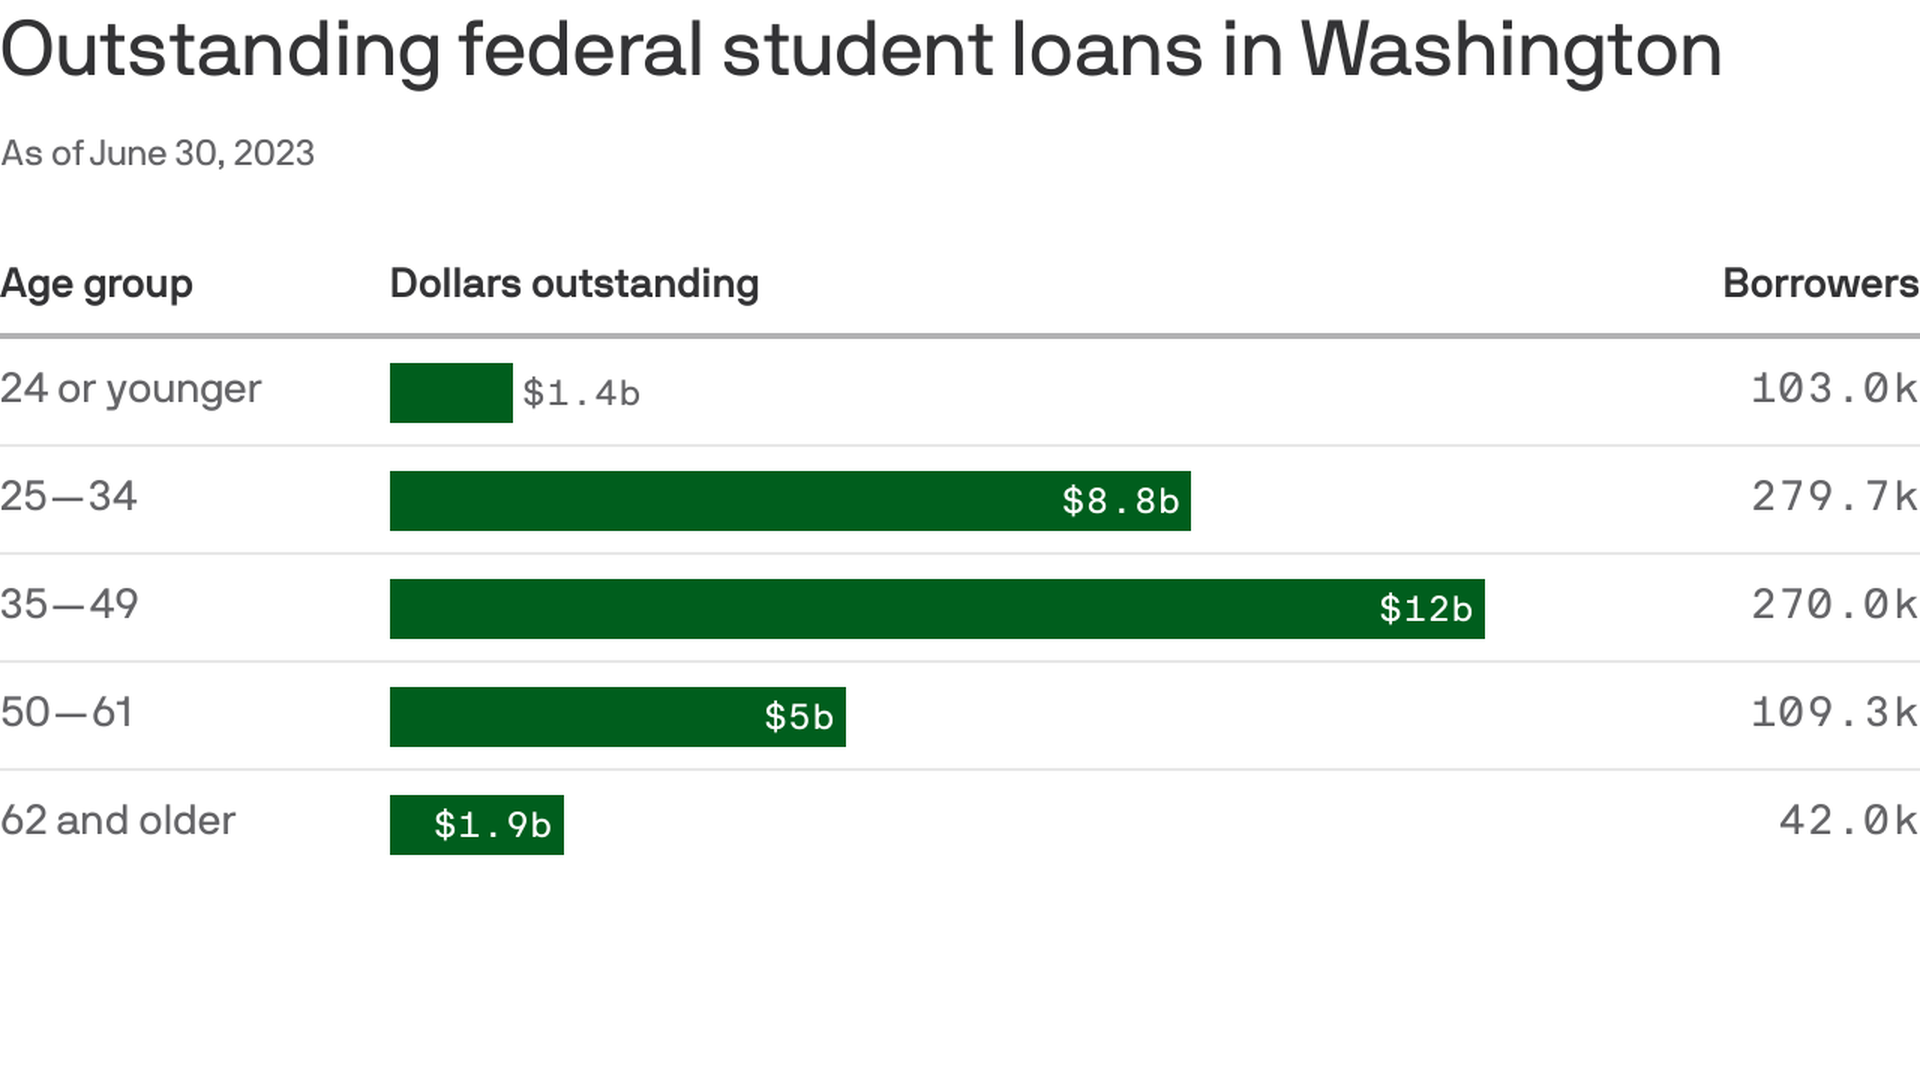 Table showing outstanding student loans in Washington state, separated into five age groups. With $12 billion owed and 270k borrowers, age group 35-49 has the largest amount of loans outstanding. The 103k borrowers who are 24 or younger have the least amount of outstanding loans with $1.4 billion.